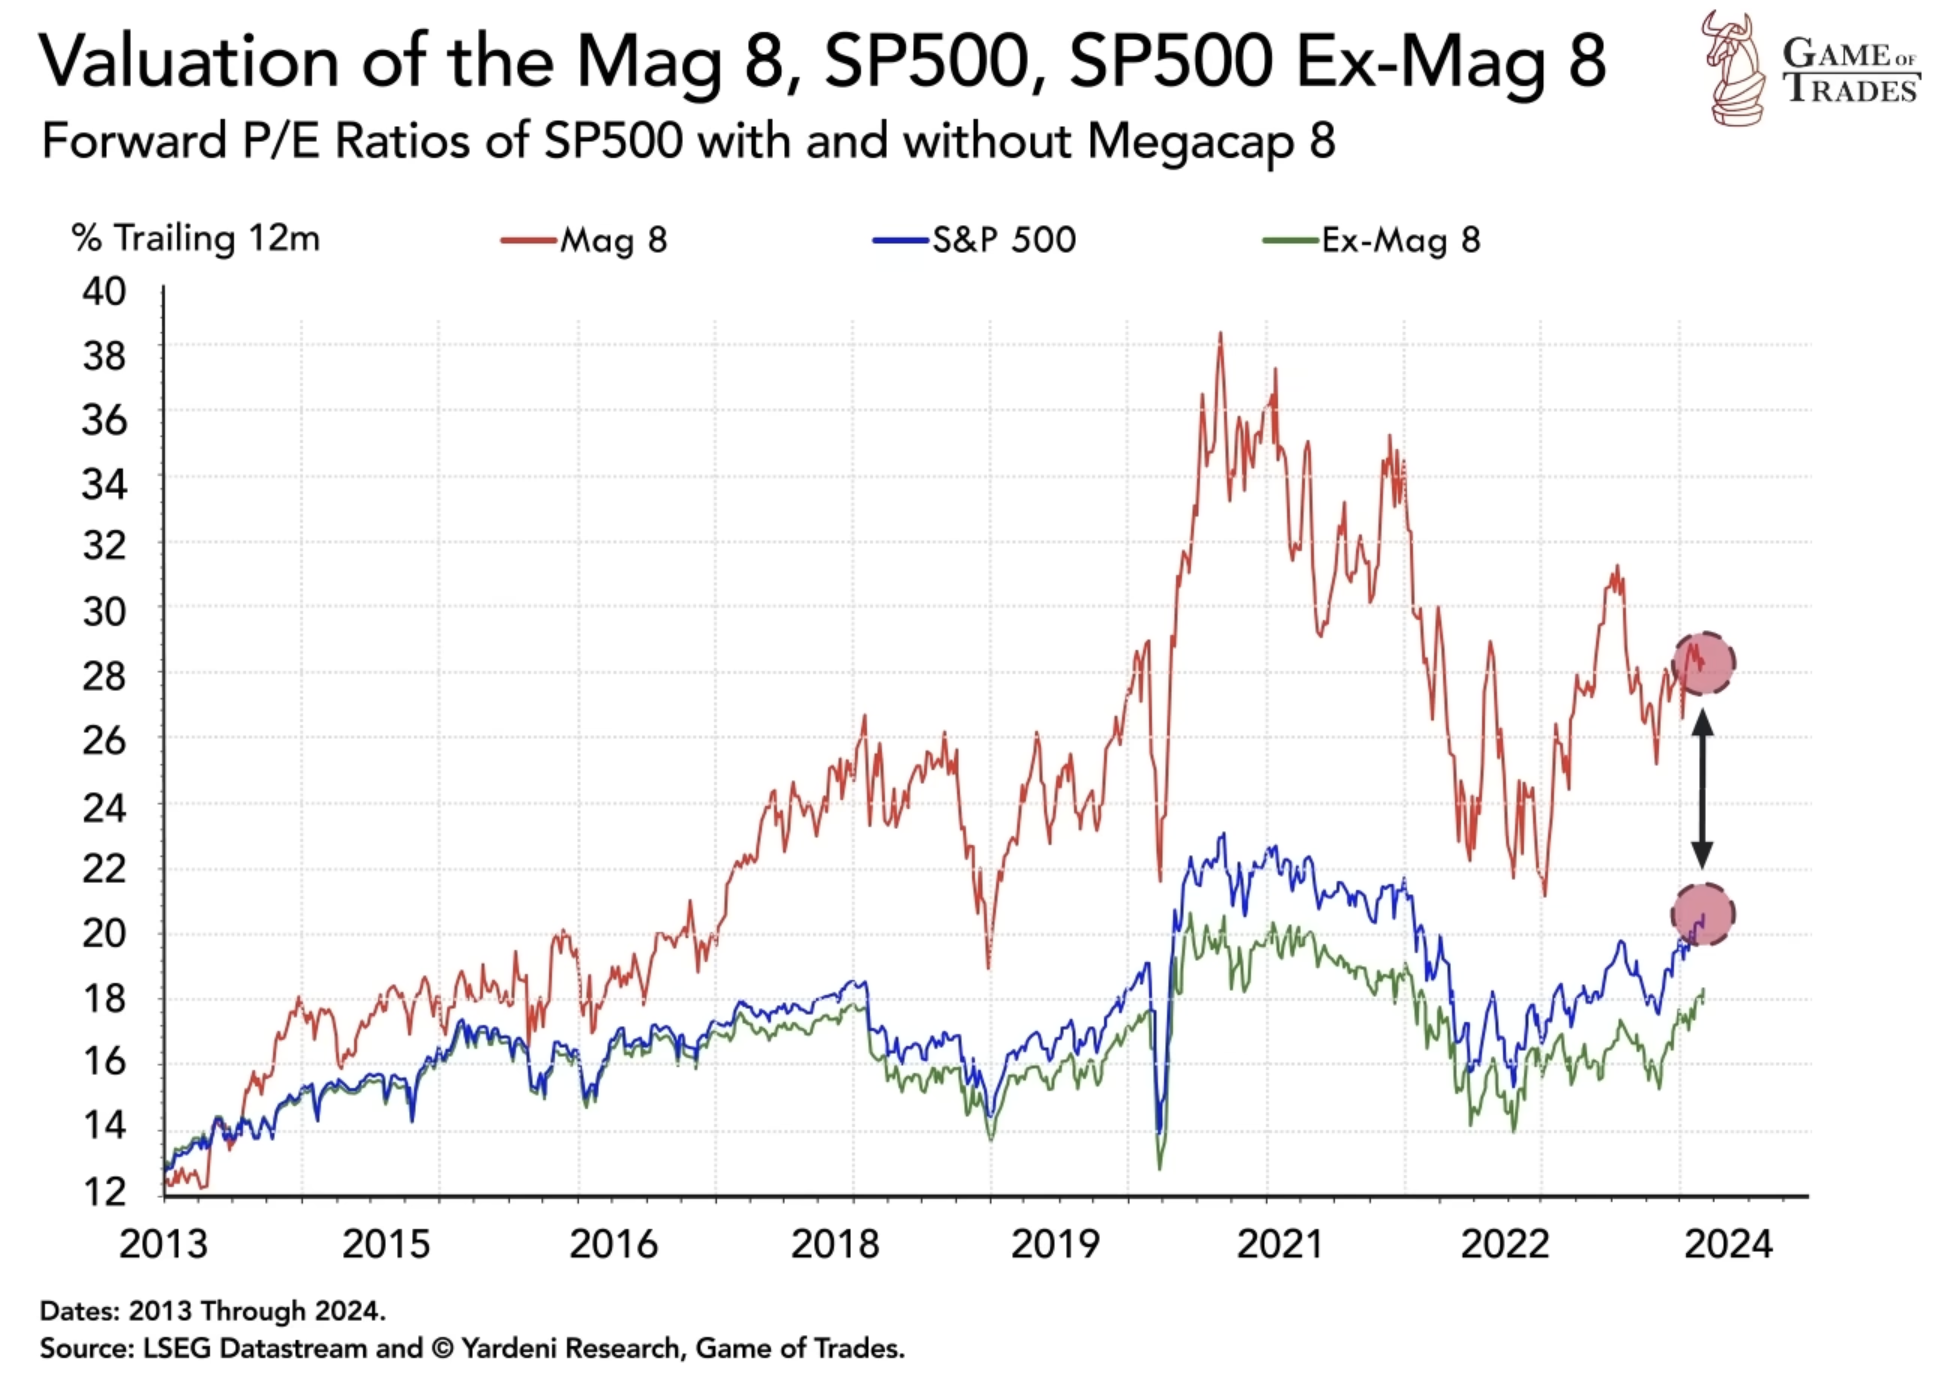 Valuation of the mag 8, SP500